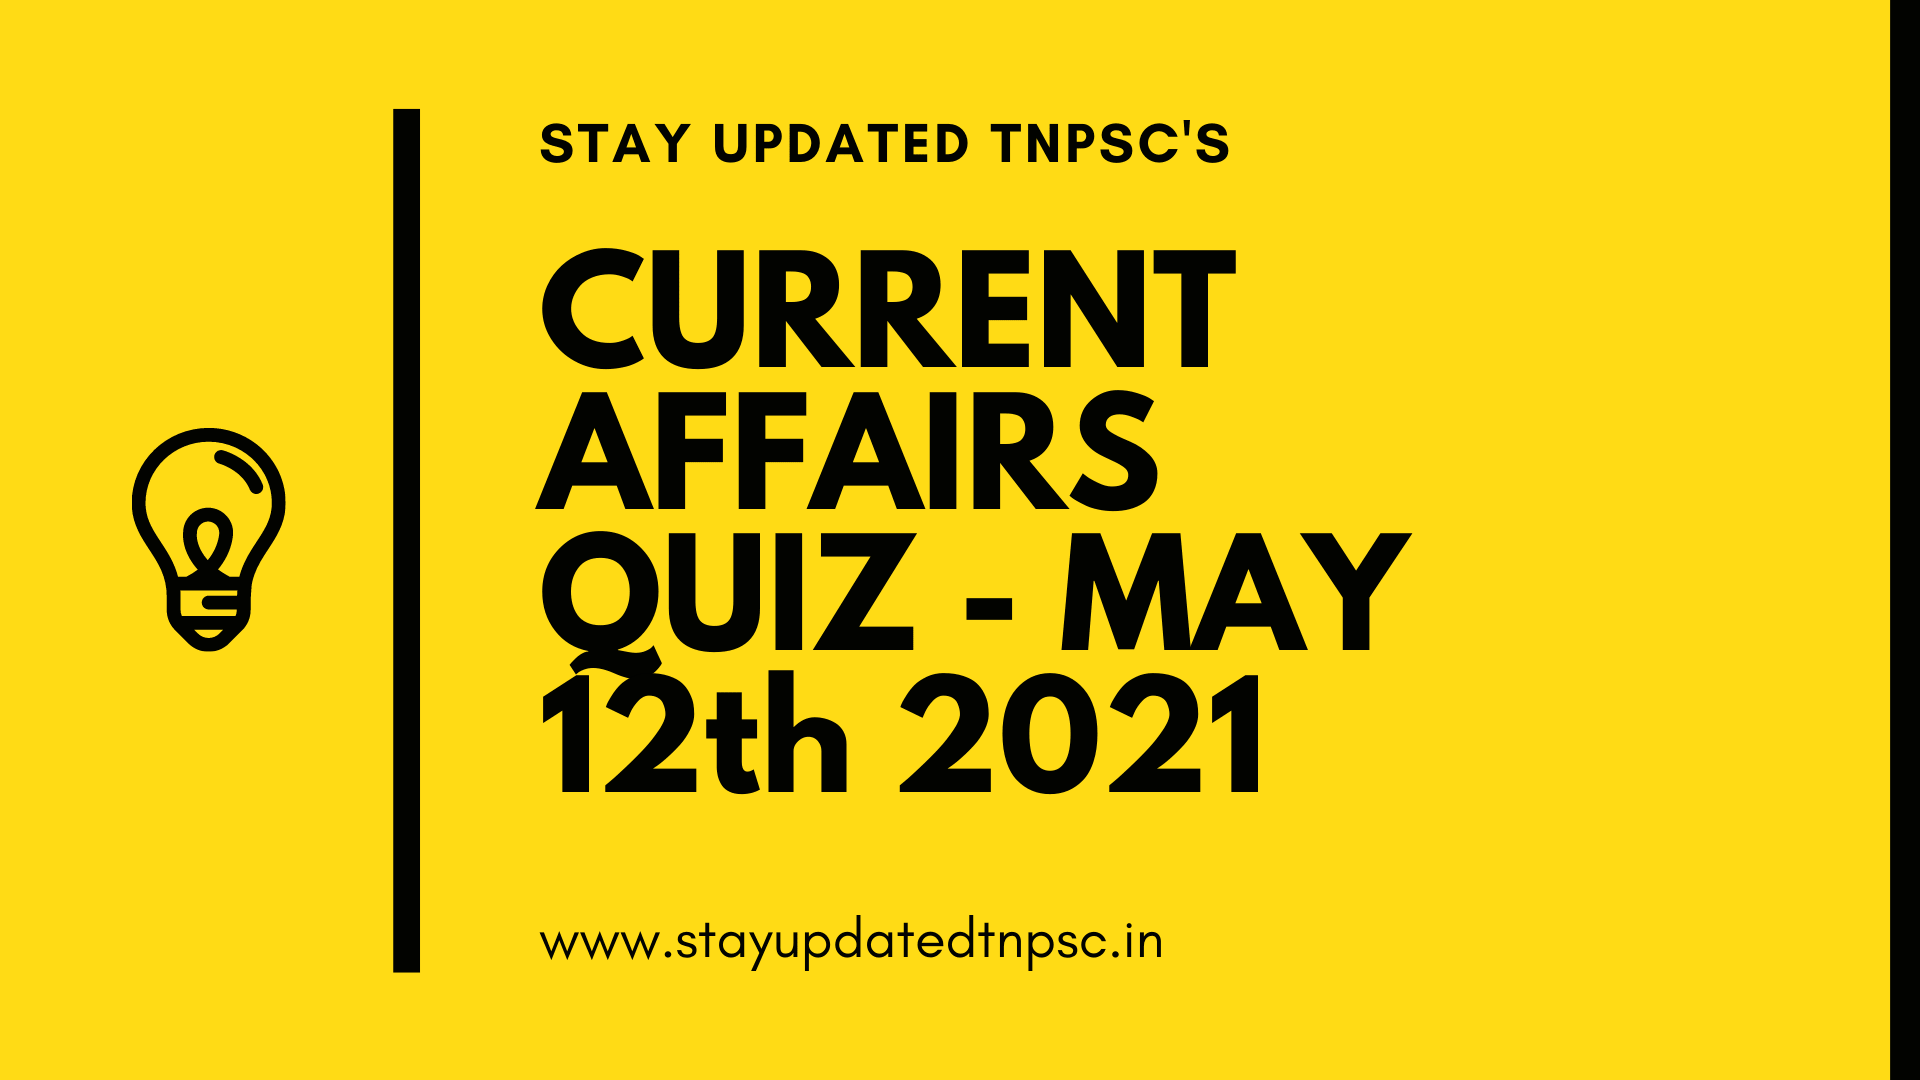 TNPSC DAILY CURRENT AFFAIRS: 12 MAY 2021